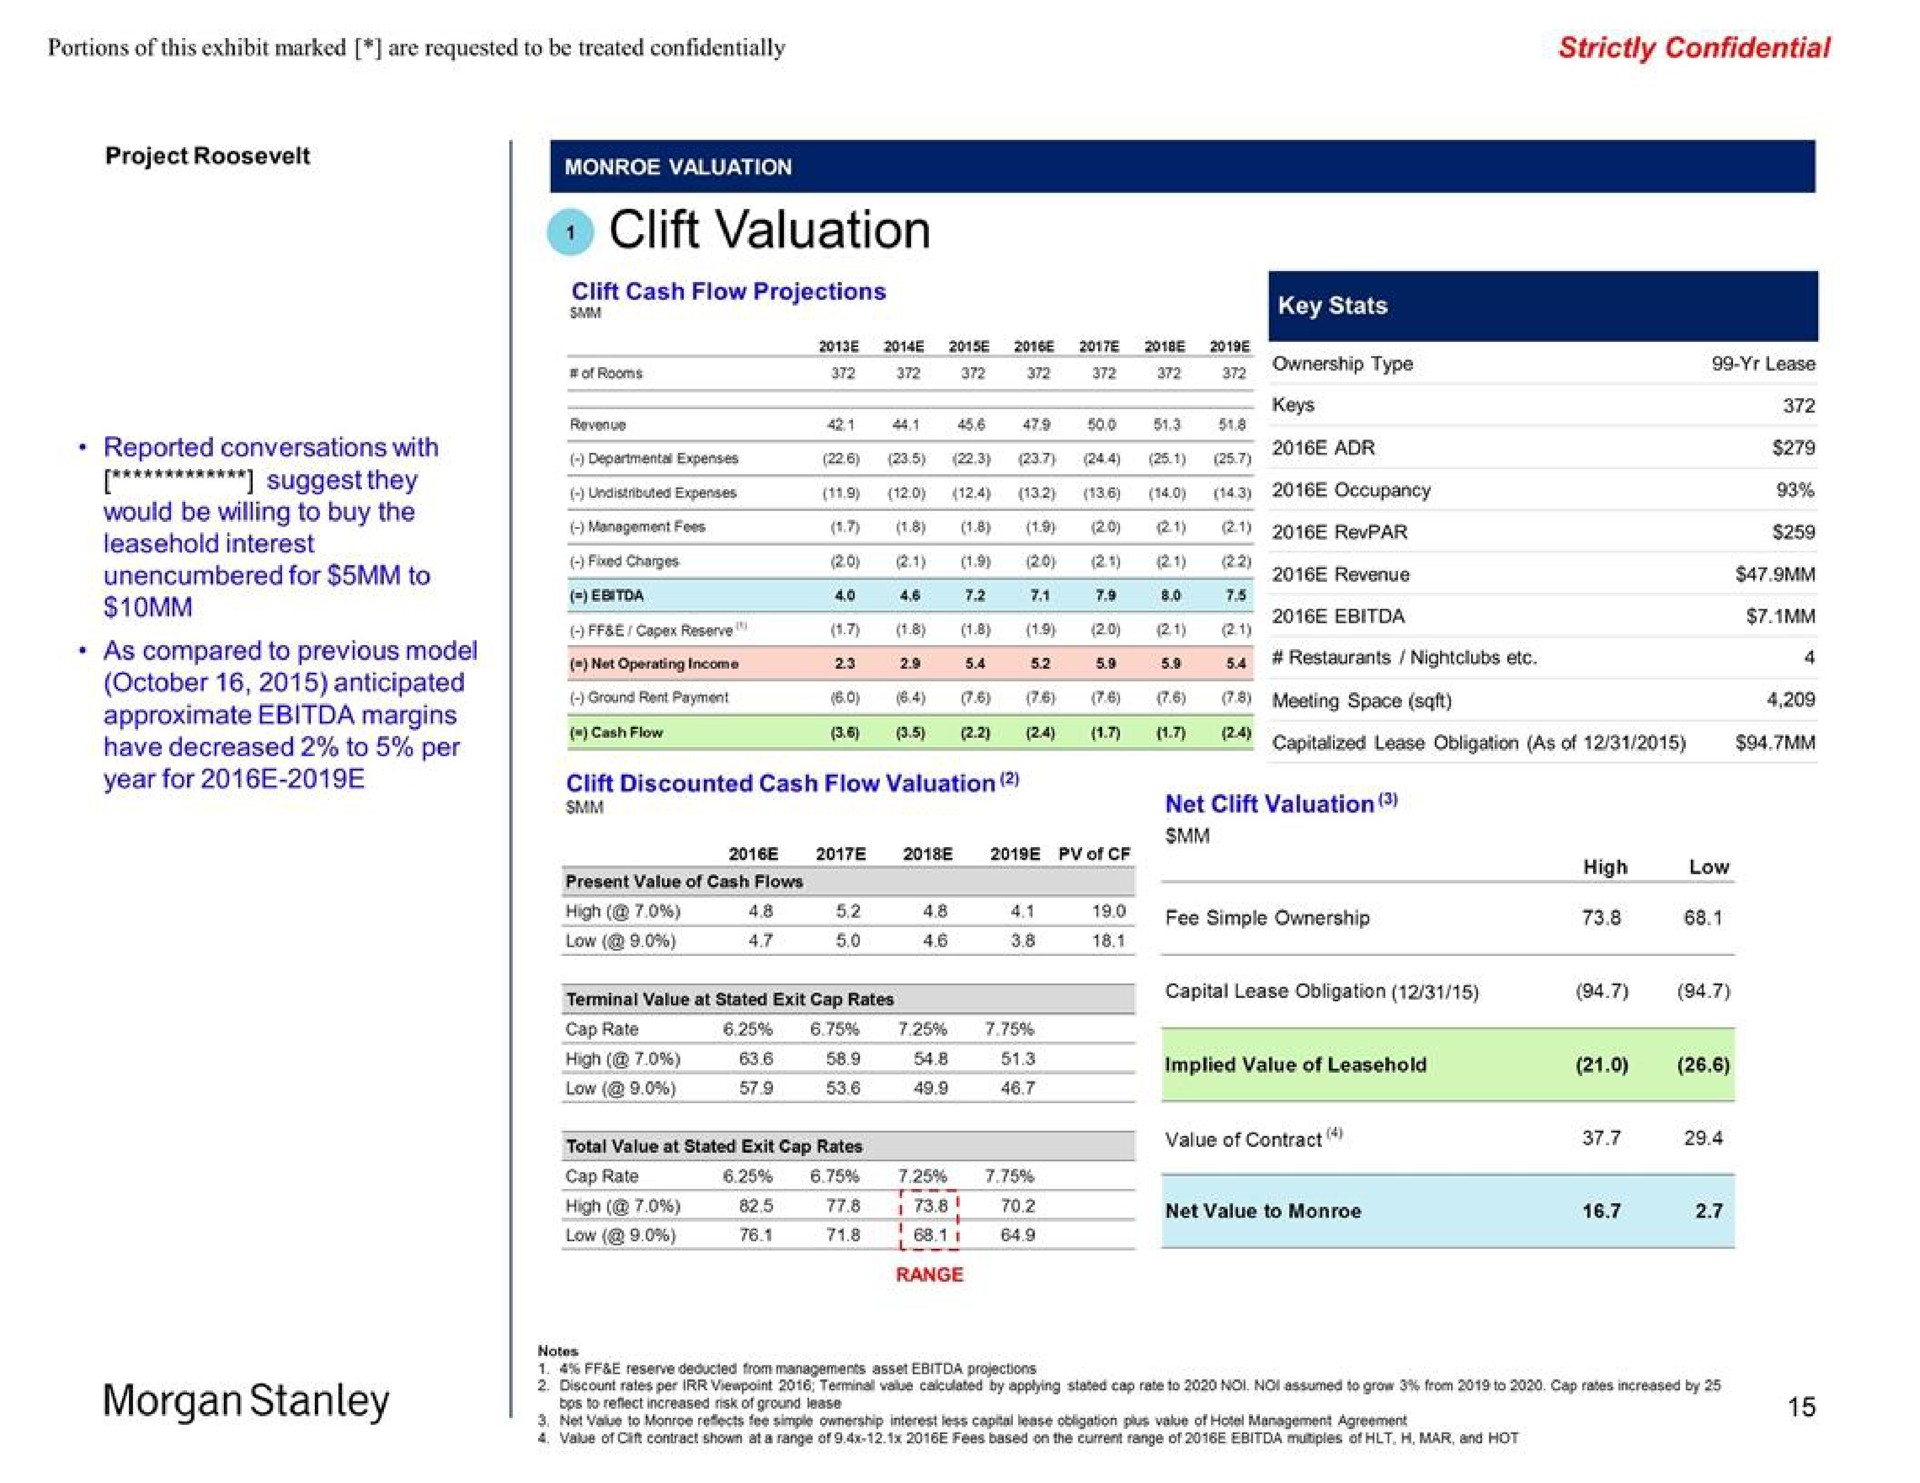 clift valuation morgan low total value at stated exit cap rates | Morgan Stanley